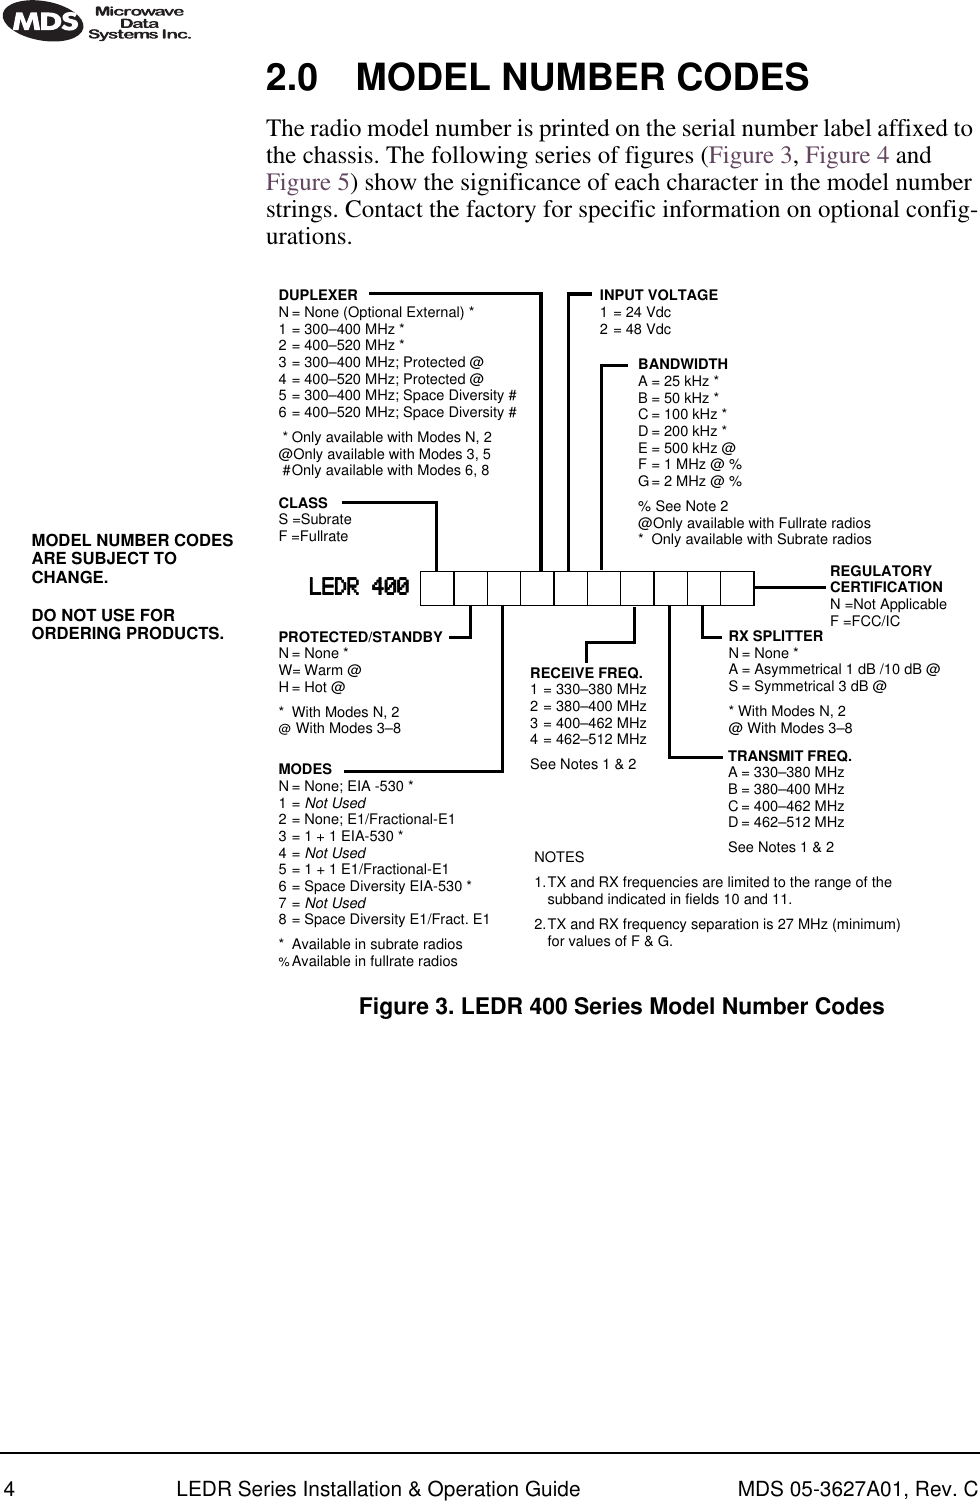  4 LEDR Series Installation &amp; Operation Guide MDS 05-3627A01, Rev. C 2.0 MODEL NUMBER CODES The radio model number is printed on the serial number label affixed to the chassis. The following series of figures (Figure 3, Figure 4 and Figure 5) show the significance of each character in the model number strings. Contact the factory for specific information on optional config-urations. Invisible place holder Figure 3. LEDR 400 Series Model Number CodesMODEL NUMBER CODES ARE SUBJECT TO CHANGE.DO NOT USE FOR ORDERING PRODUCTS.MODESN = None; EIA -530 *1=Not Used2 = None; E1/Fractional-E13 = 1 + 1 EIA-530 *4=Not Used5 = 1 + 1 E1/Fractional-E16 = Space Diversity EIA-530 *7= Not Used8 = Space Diversity E1/Fract. E1*  Available in subrate radios%Available in fullrate radiosPROTECTED/STANDBYN = None *W= Warm @H = Hot @*  With Modes N, 2@ With Modes 3–8LLLLEEEEDDDDRRRR    444400000000CLASSS =SubrateF =FullrateDUPLEXERN = None (Optional External) *1 = 300–400 MHz *2 = 400–520 MHz *3 = 300–400 MHz; Protected @4 = 400–520 MHz; Protected @5 = 300–400 MHz; Space Diversity #6 = 400–520 MHz; Space Diversity # * Only available with Modes N, 2@Only available with Modes 3, 5 #Only available with Modes 6, 8BANDWIDTHA = 25 kHz *B = 50 kHz *C = 100 kHz *D = 200 kHz *E = 500 kHz @F = 1 MHz @ %G= 2 MHz @ % % See Note 2@Only available with Fullrate radios* Only available with Subrate radiosNOTES1.TX and RX frequencies are limited to the range of the subband indicated in fields 10 and 11.2.TX and RX frequency separation is 27 MHz (minimum) for values of F &amp; G.TRANSMIT FREQ.A = 330–380 MHzB = 380–400 MHzC = 400–462 MHzD = 462–512 MHzSee Notes 1 &amp; 2REGULATORY CERTIFICATIONN =Not ApplicableF =FCC/ICRX SPLITTERN = None *A = Asymmetrical 1 dB /10 dB @S = Symmetrical 3 dB @* With Modes N, 2@ With Modes 3–8INPUT VOLTAGE1 = 24 Vdc2 = 48 VdcRECEIVE FREQ.1 = 330–380 MHz2 = 380–400 MHz3 = 400–462 MHz4 = 462–512 MHzSee Notes 1 &amp; 2